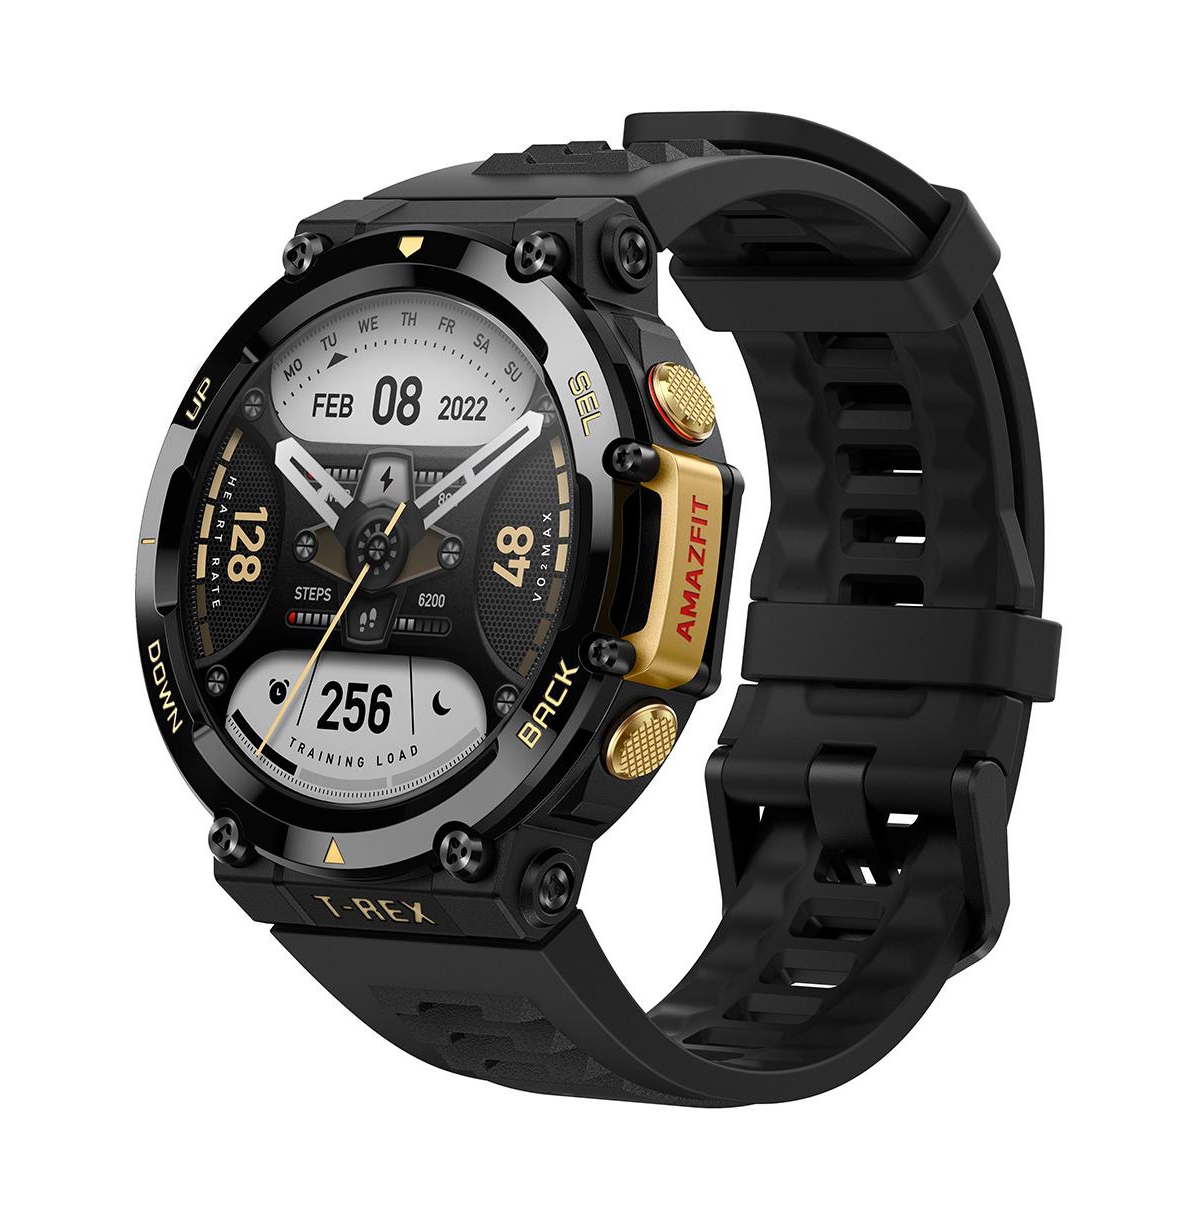 T-Rex 2 Outdoor Smartwatch - Astro Black and Gold Rubber strap - Black